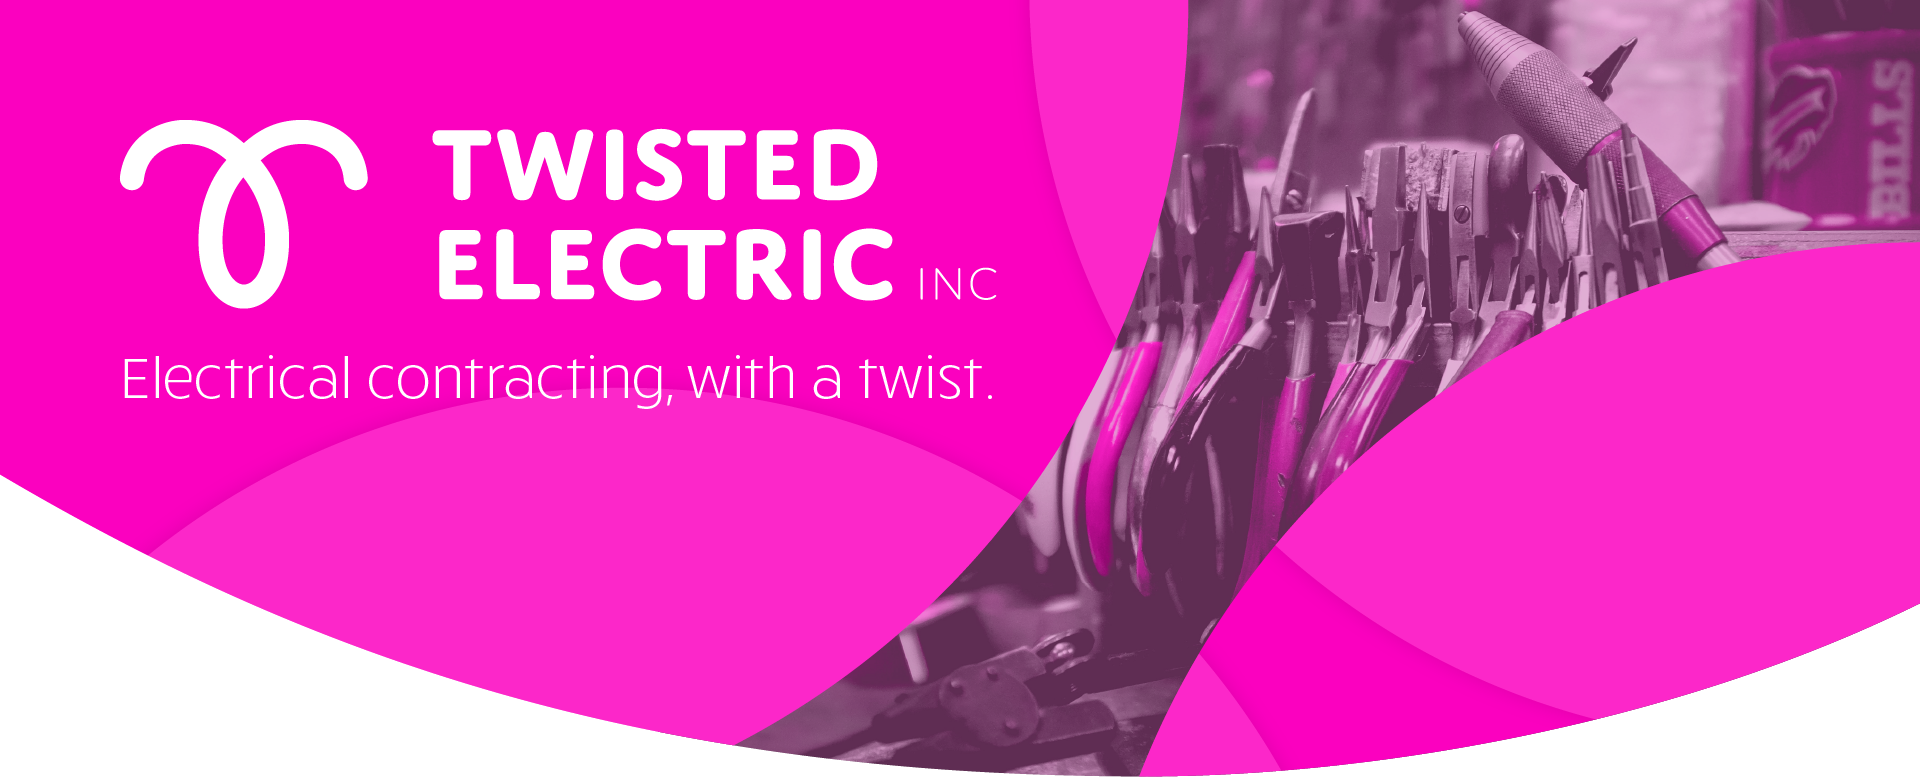 Twisted Electric Inc website header with bright pink elements and white text stating "Electrical contracting, with a twist."